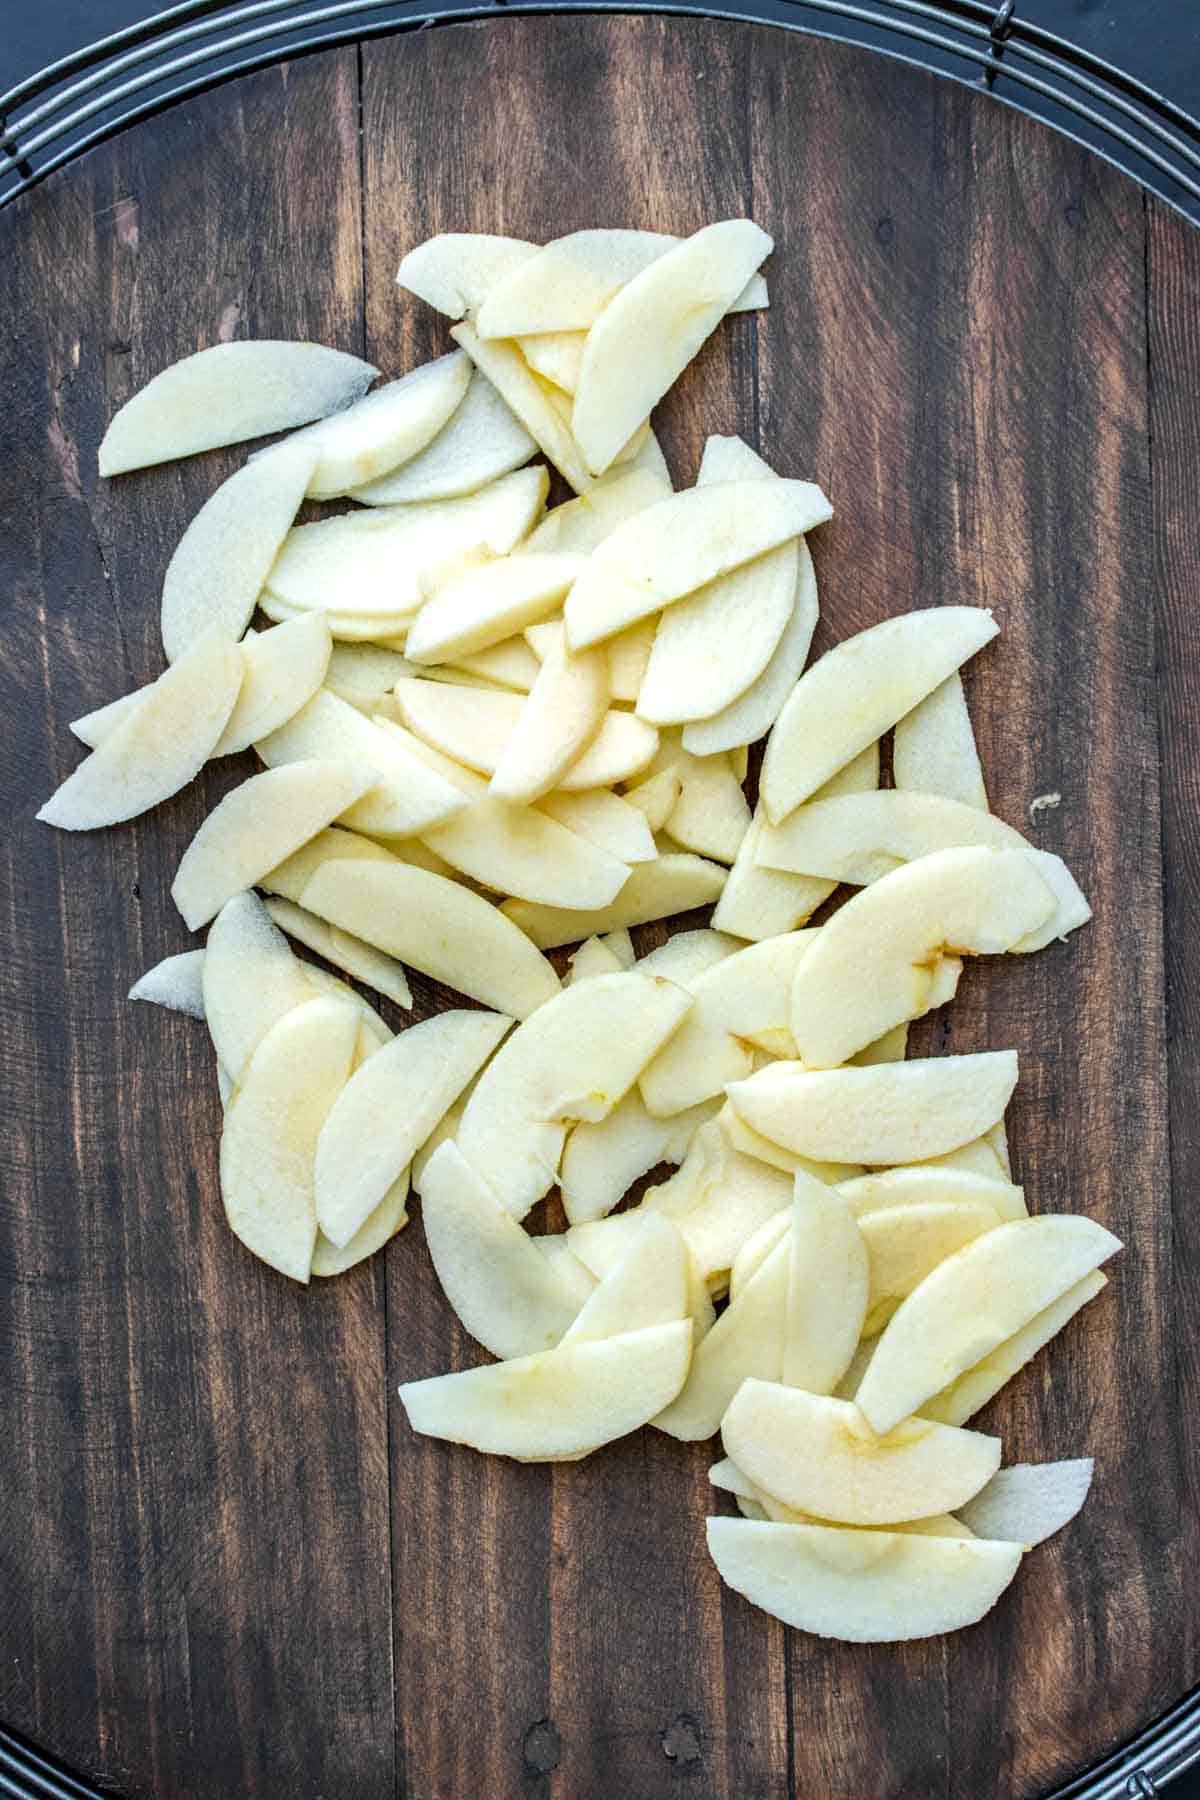 Peeled sliced apples on a wooden surface